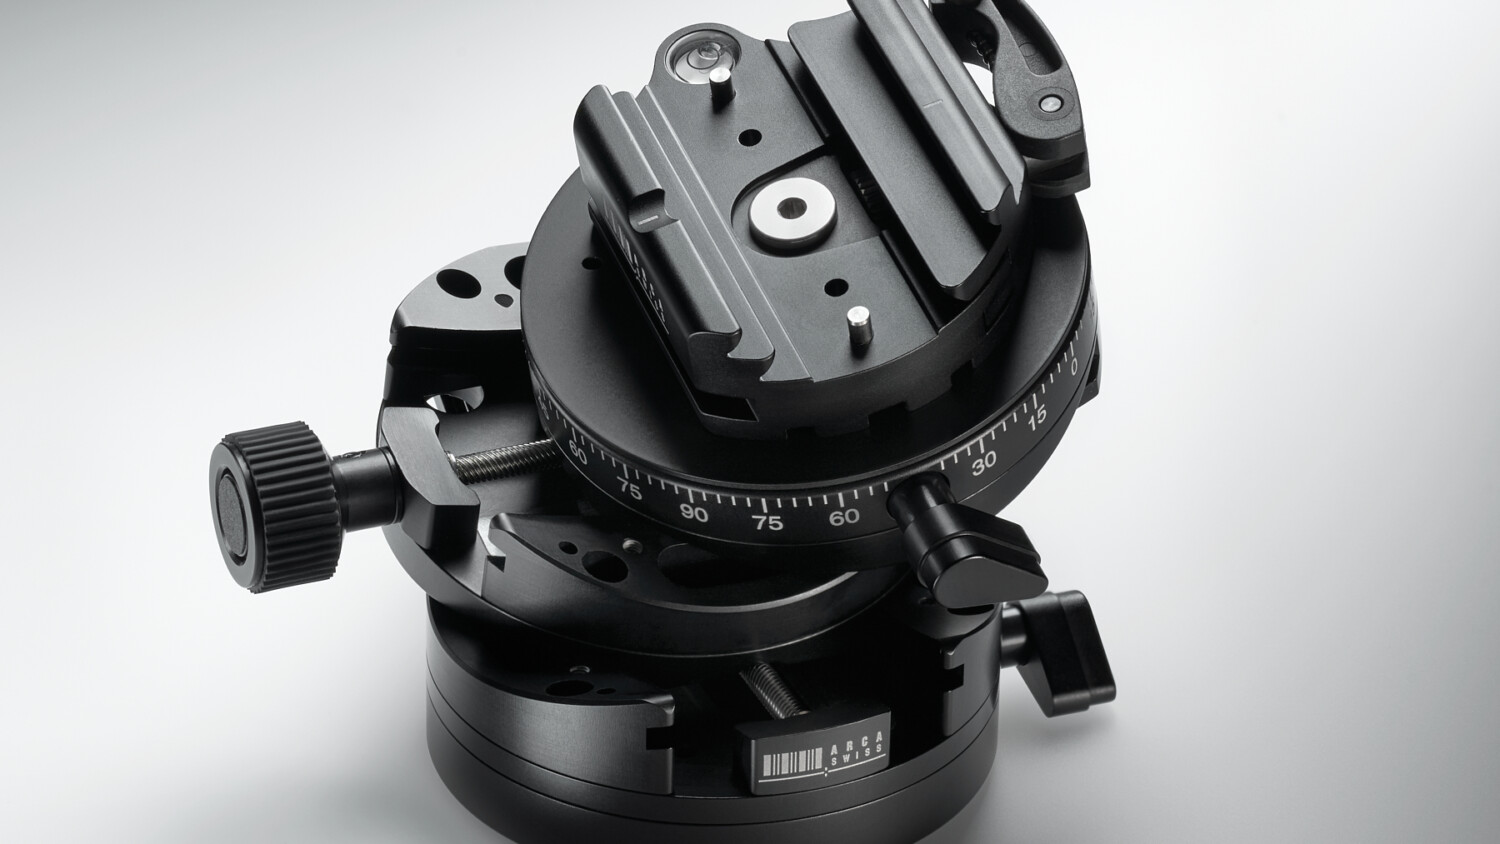 Arca Swiss Announces Core 75 Leveler; Perhaps The Perfect Mid-Sized Geared Head